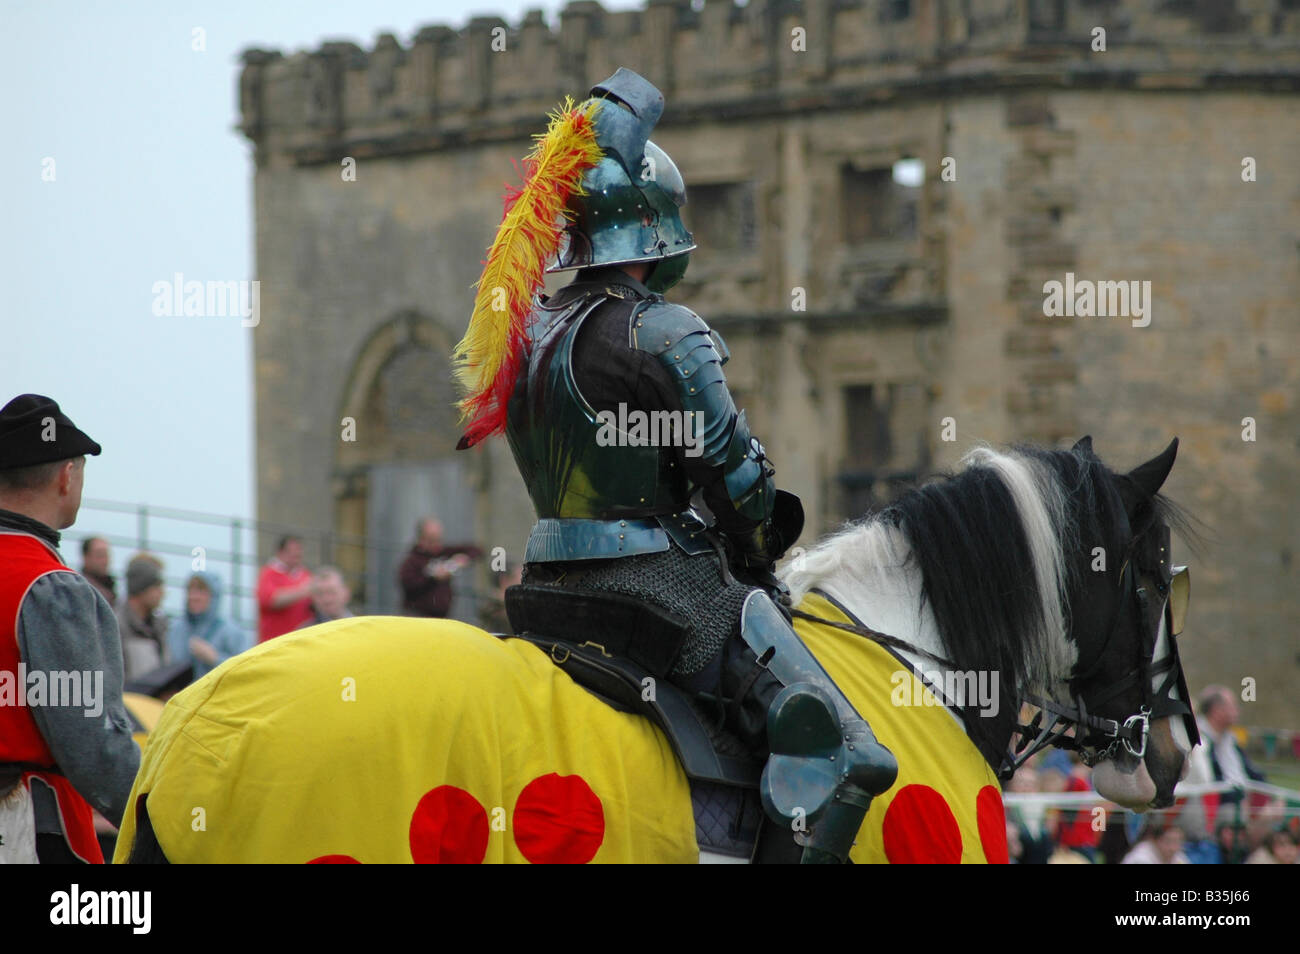 Yellow knight on horseback in front of crowds Stock Photo